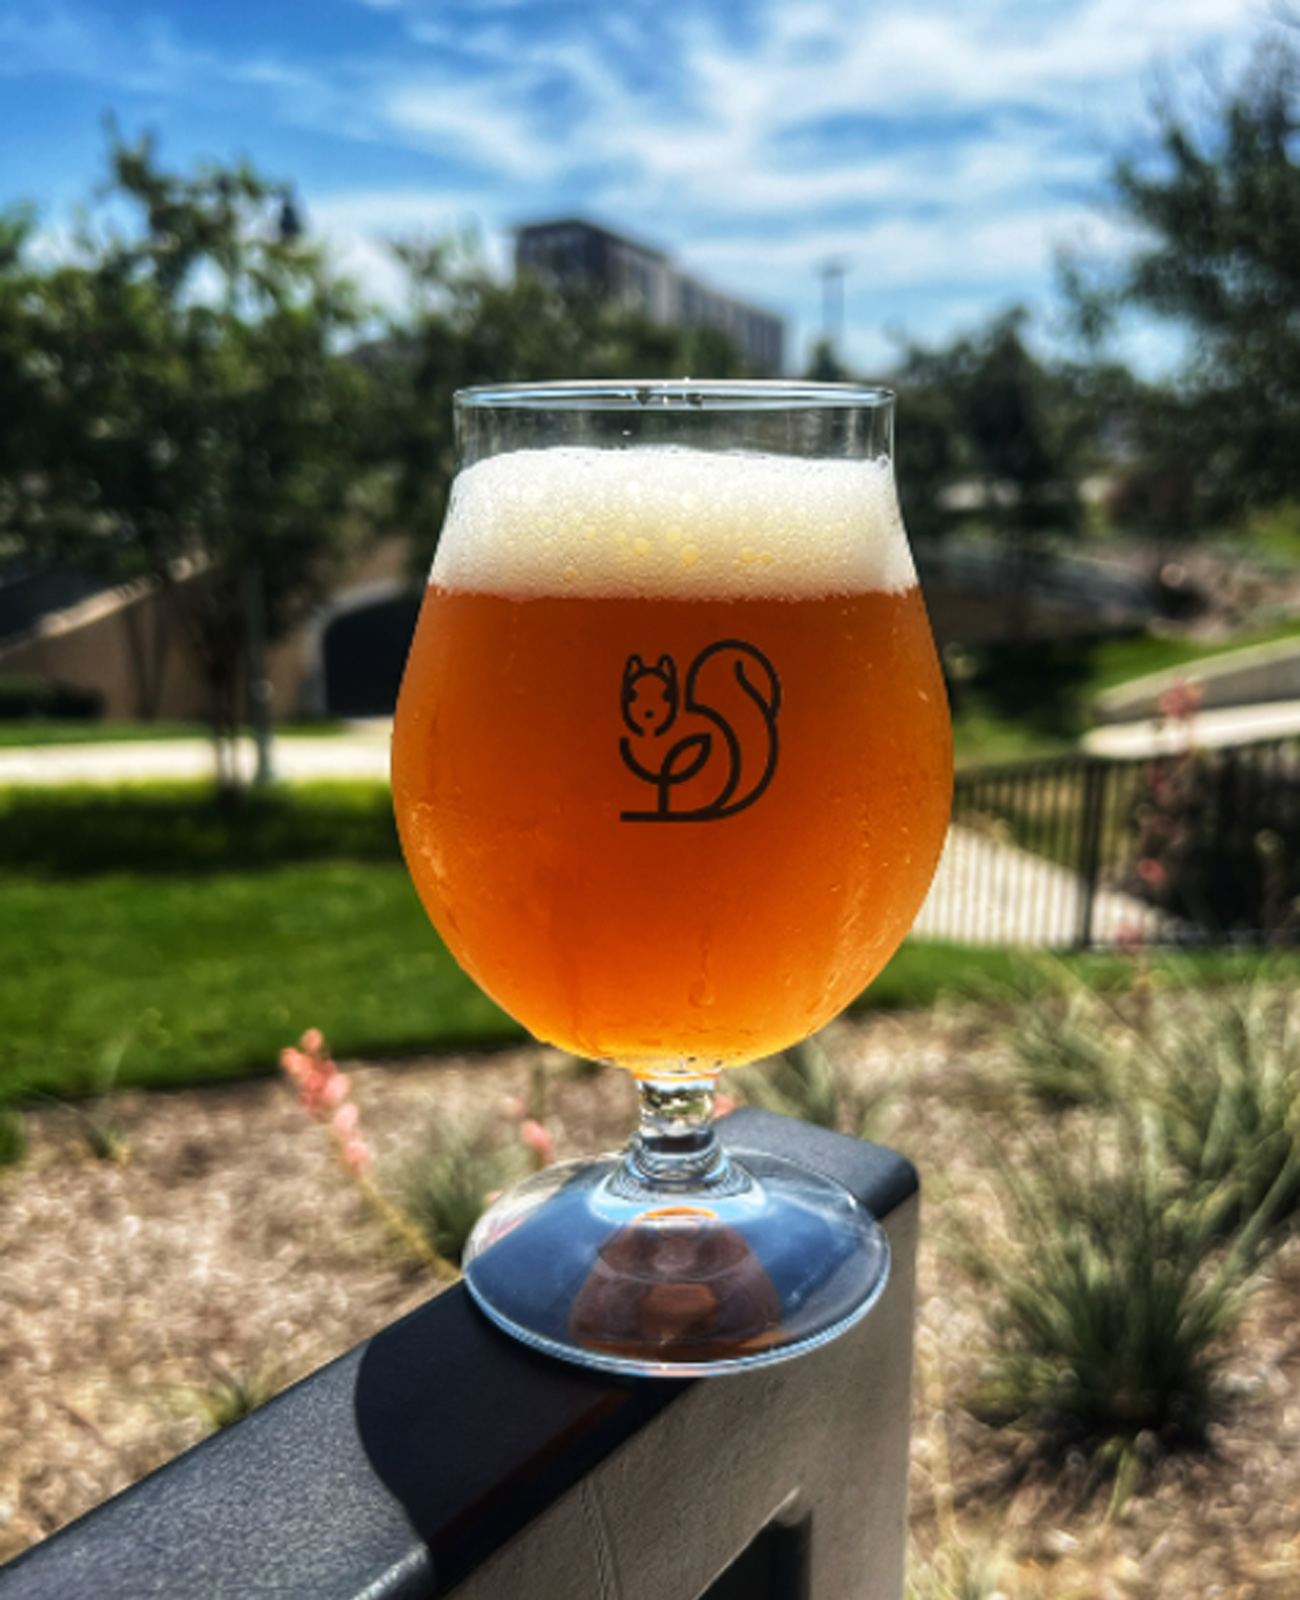 Hazy IPA from our brewery in The Colony, TX